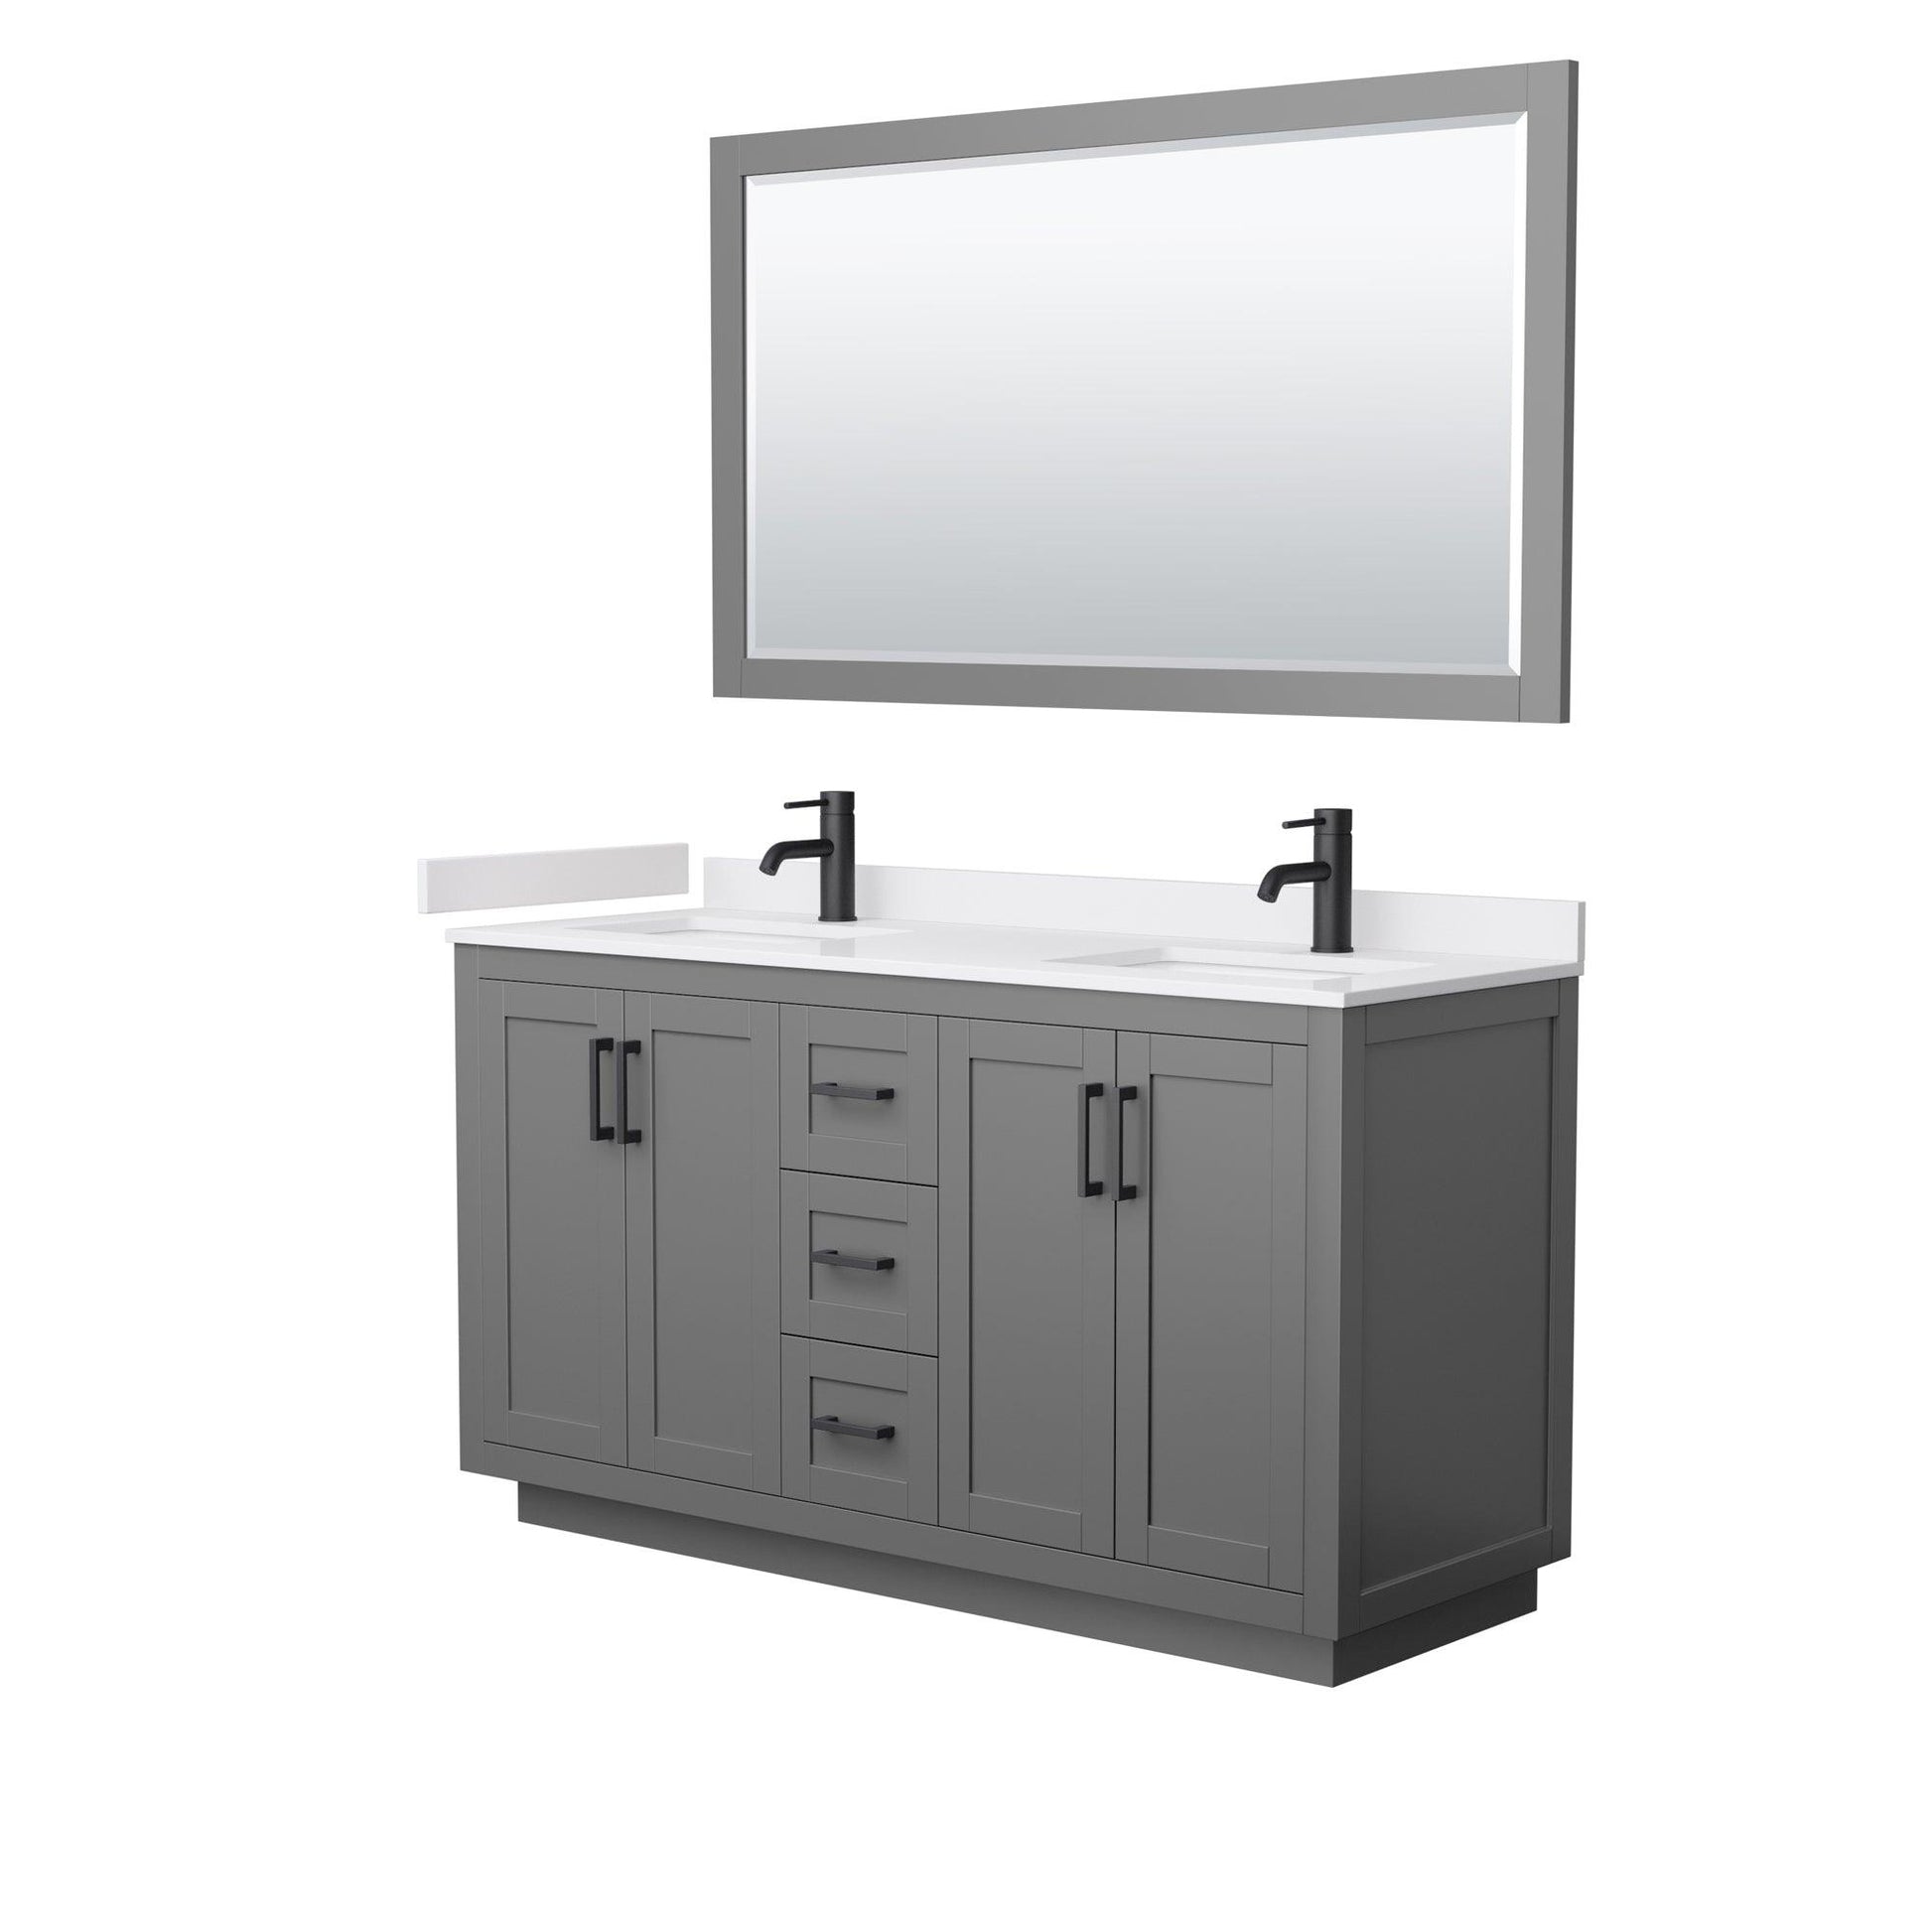 
  
  Wyndham Collection Miranda Double Bathroom Vanity in Dark Gray, White Cultured Marble Countertop, Undermount Square Sinks, Complementary Trim, Optional Mirror
  
